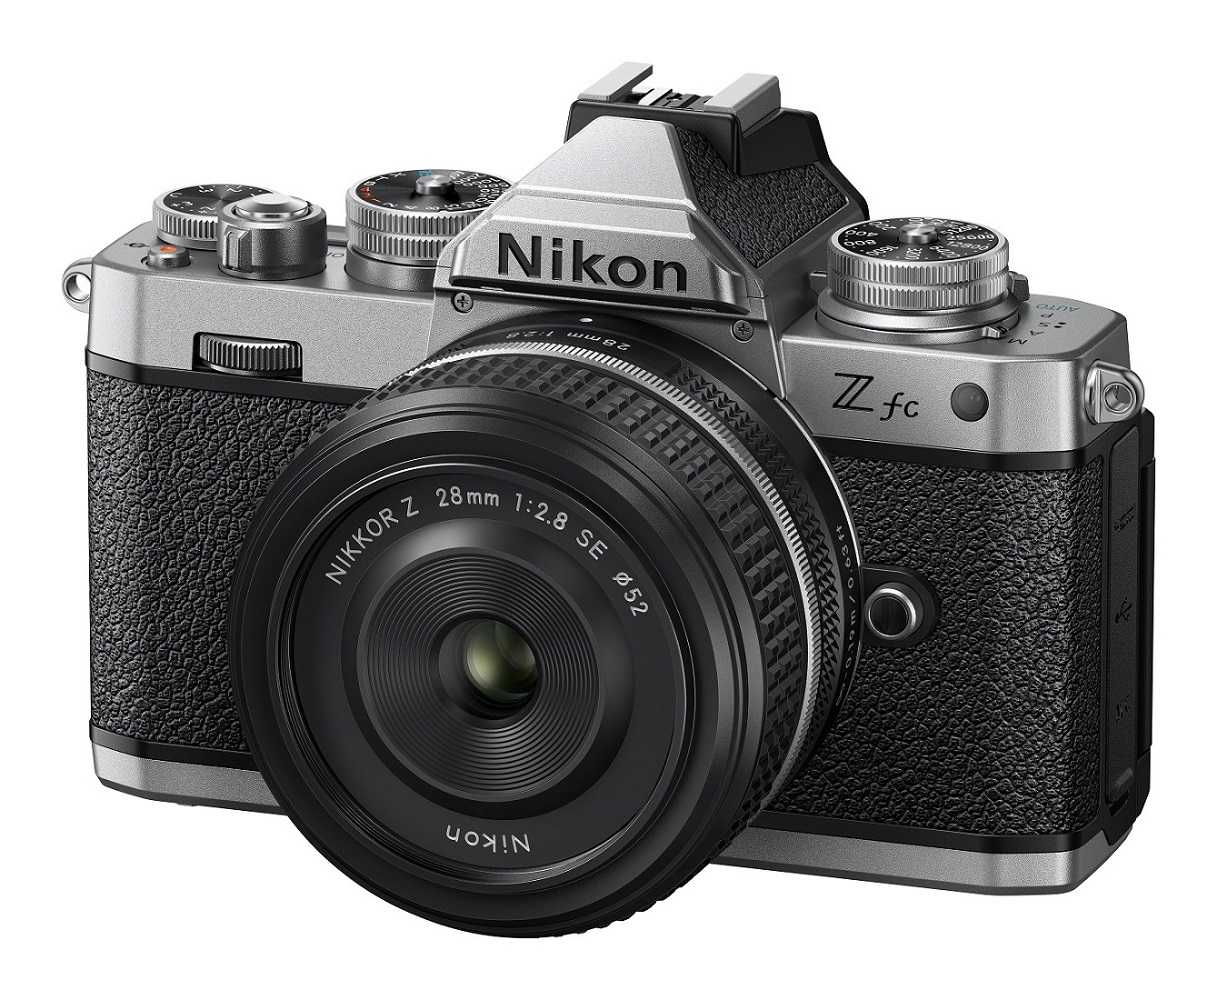 NIKON Z fc: between innovation and tradition